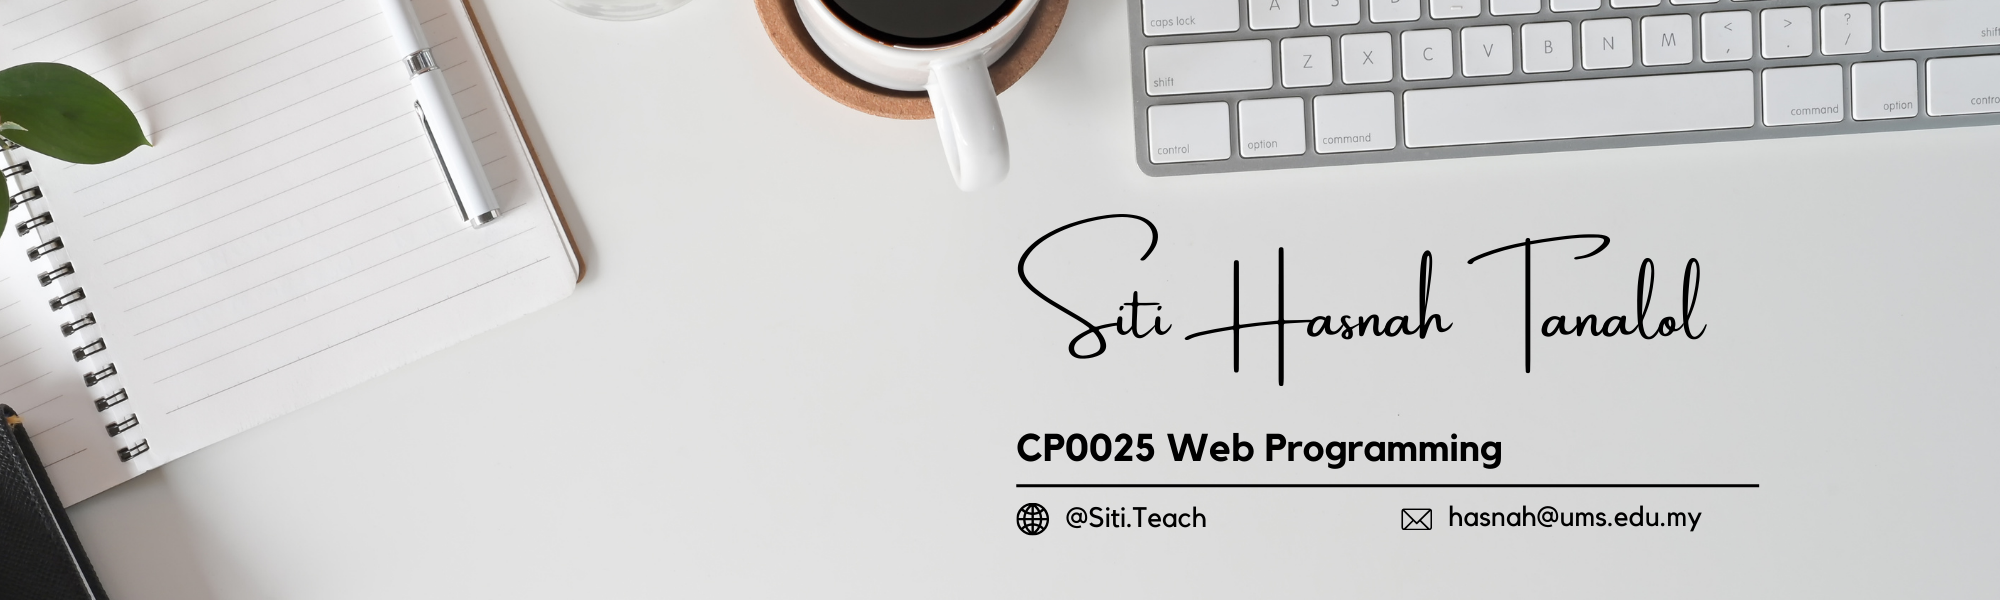 CP0025 INTRODUCTION TO WEB PROGRAMMING [2-2023/2024]